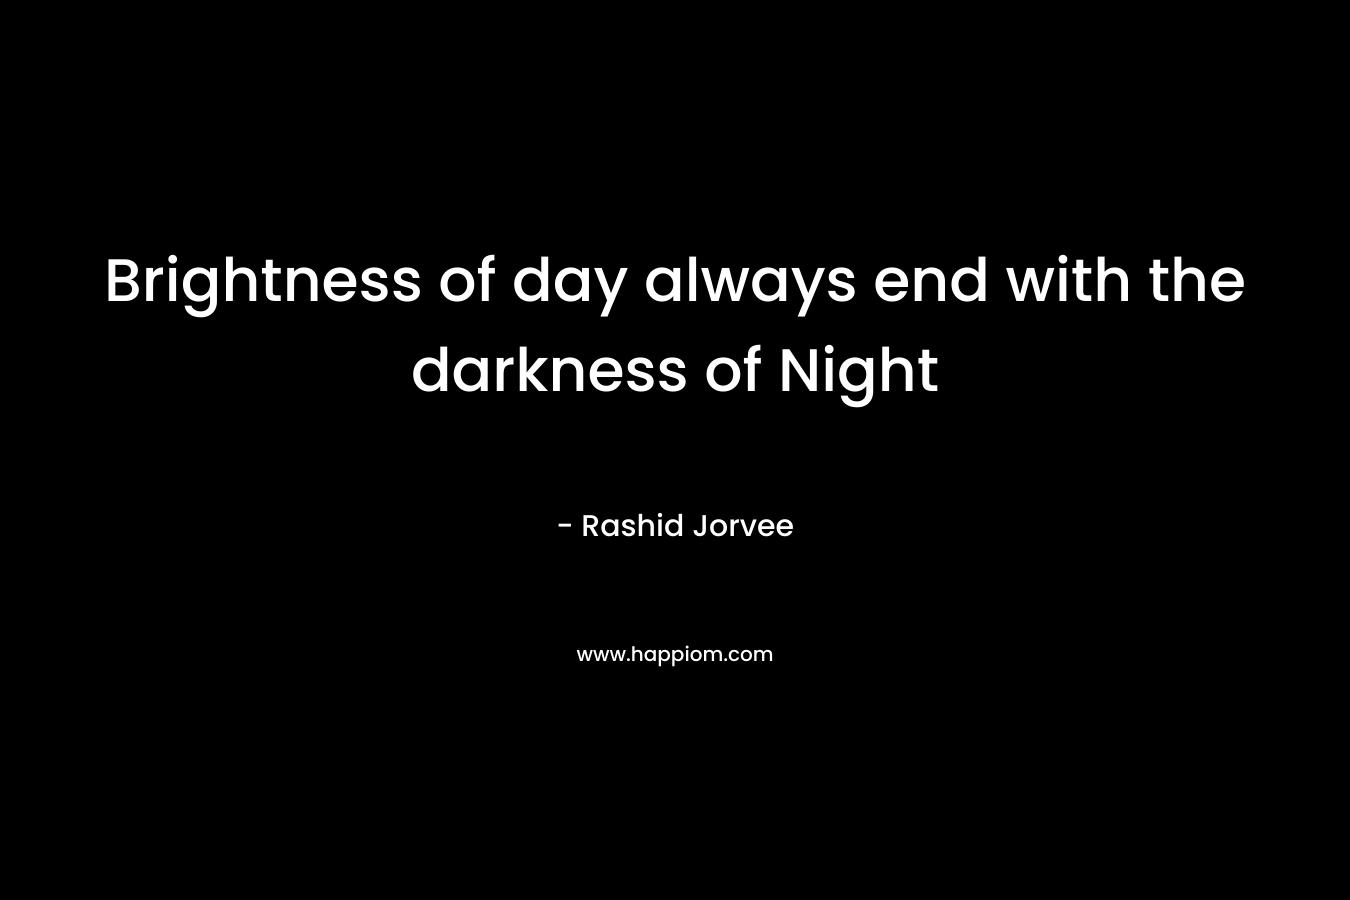 Brightness of day always end with the darkness of Night